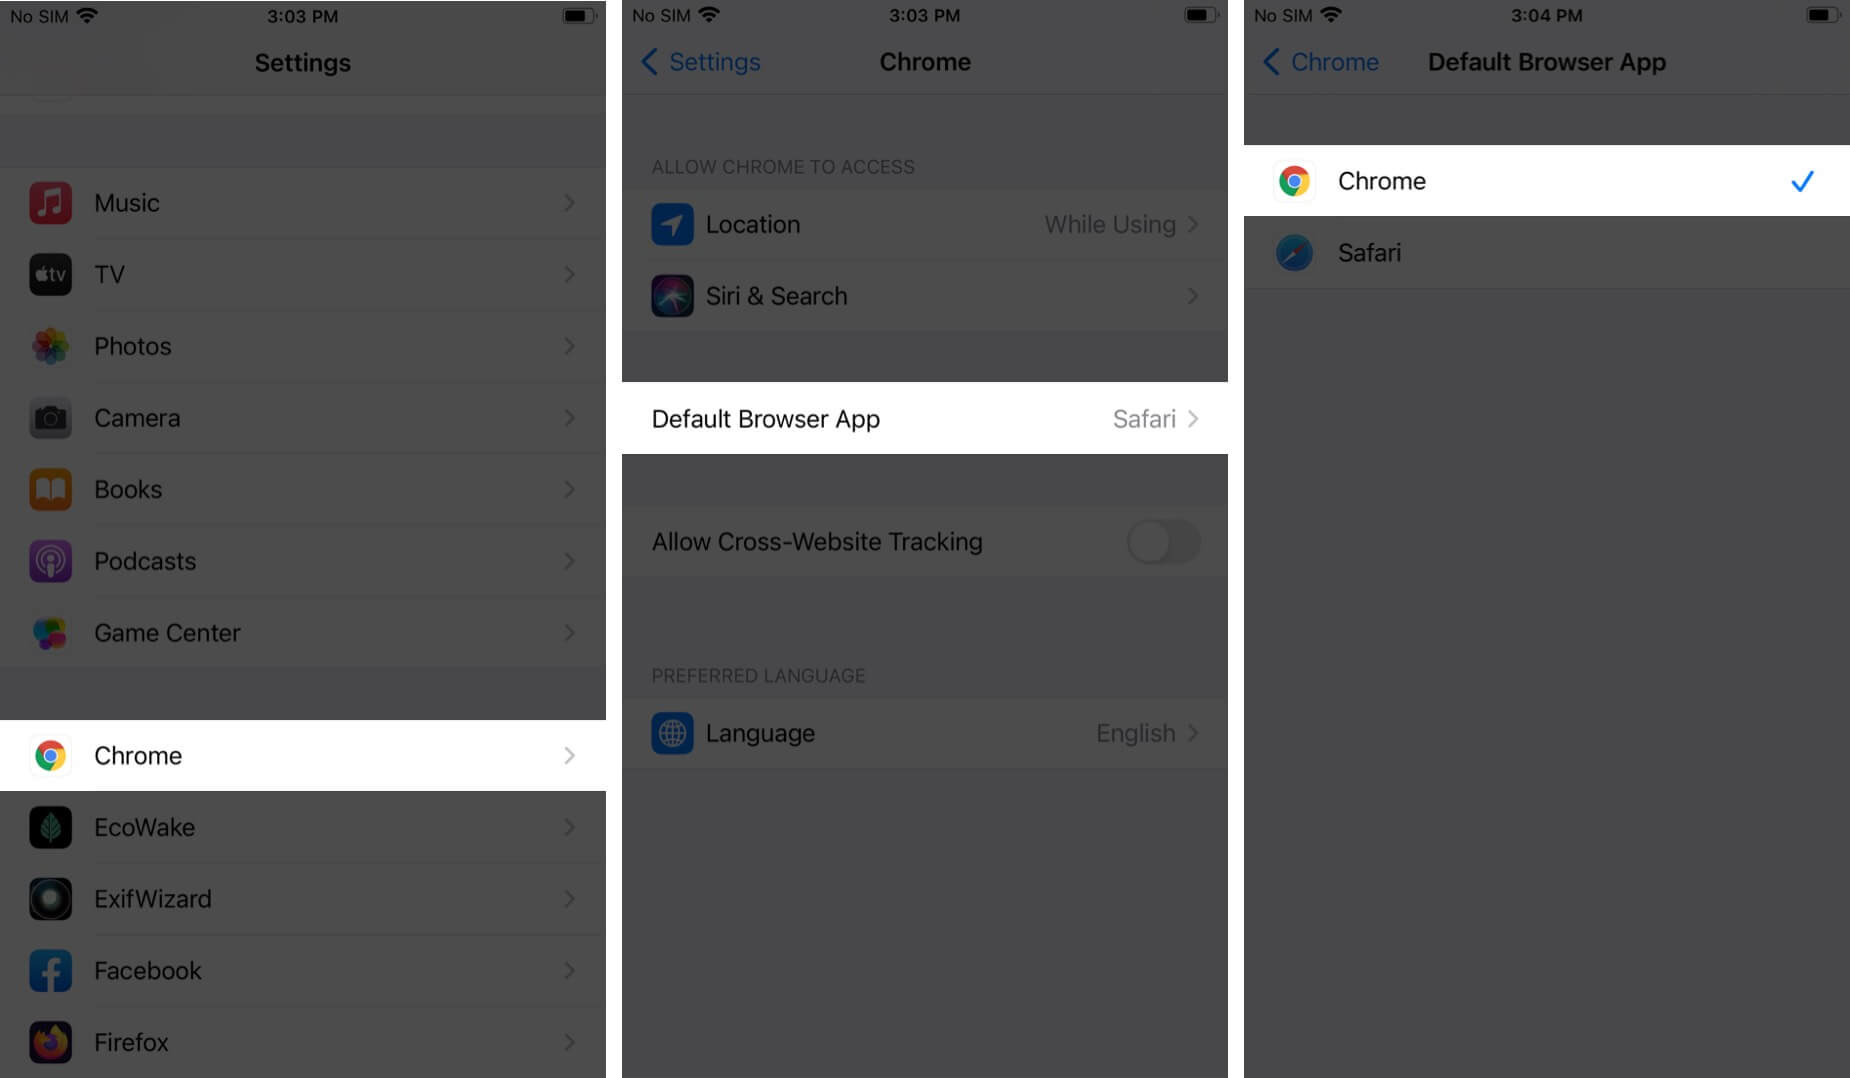 open settings tap on chrome then tap on default browser app and select chrome on iphone